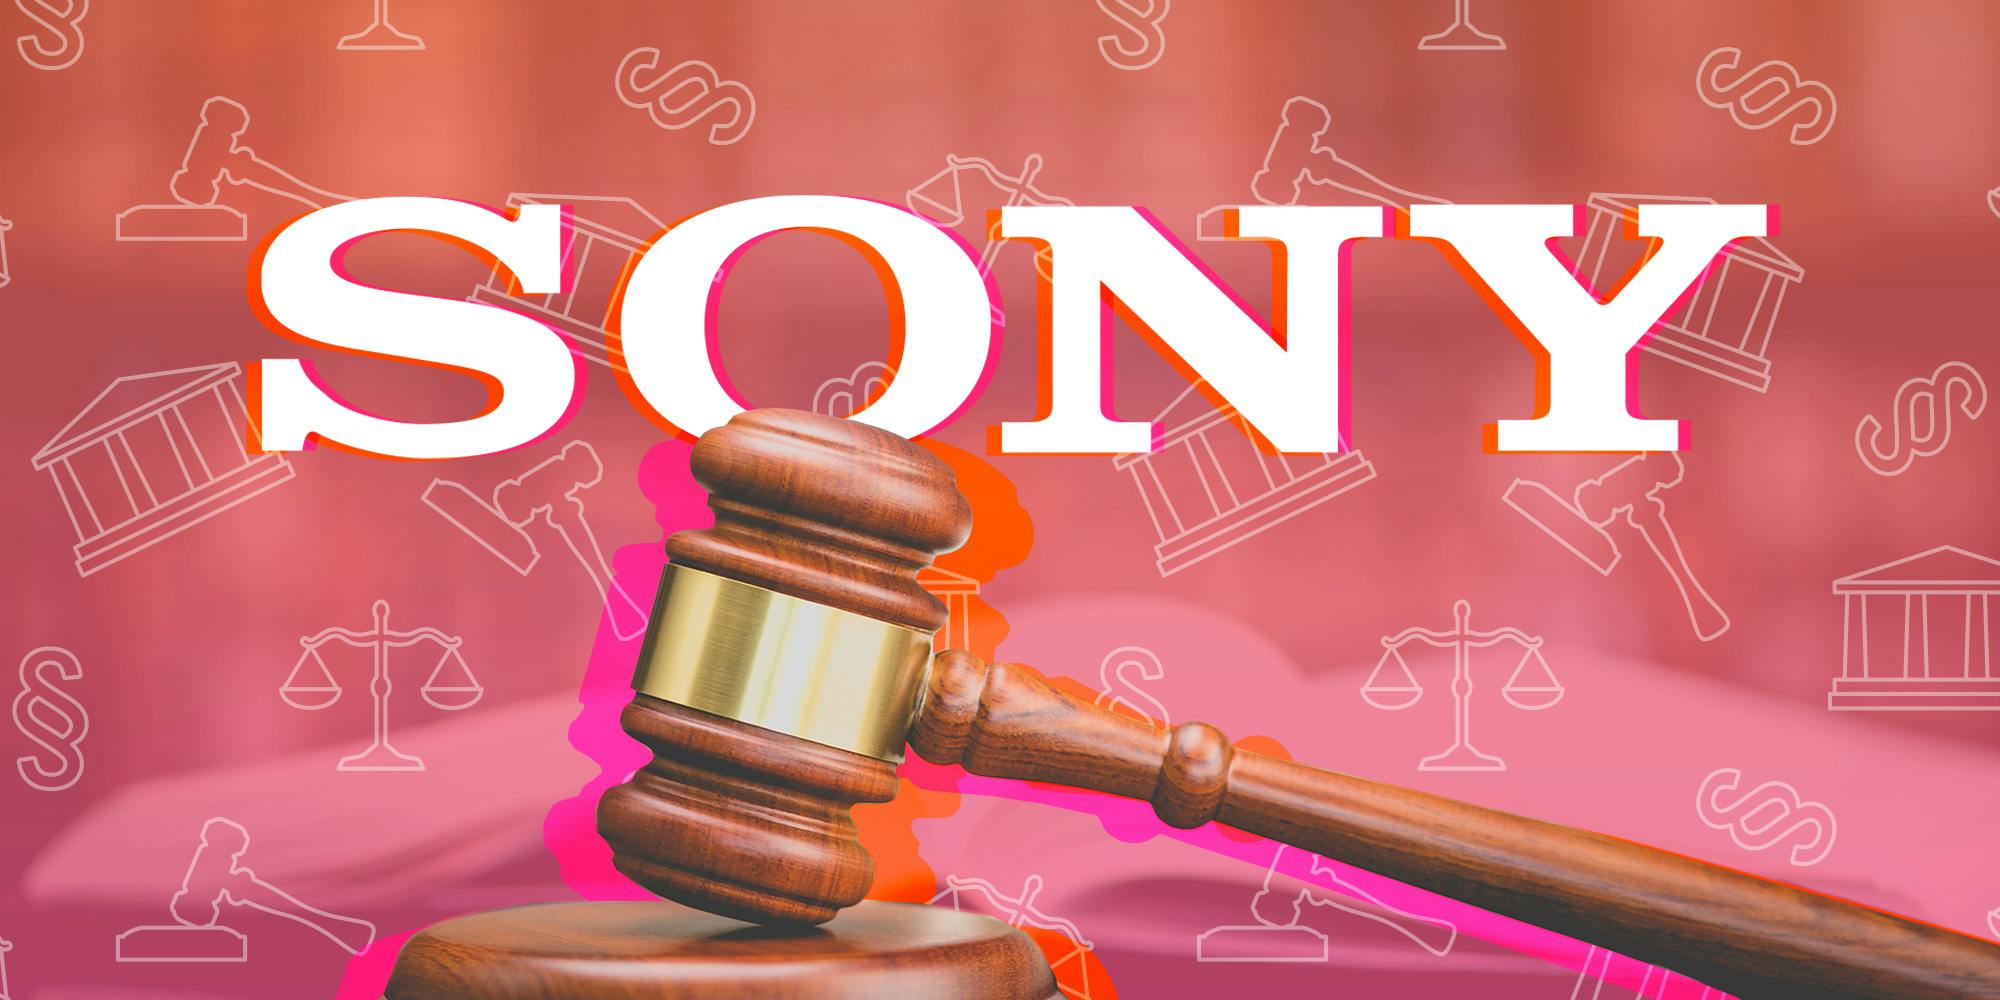 Creators, be Warned: Sony’s Latest Lawsuit May Come Back to Bite You